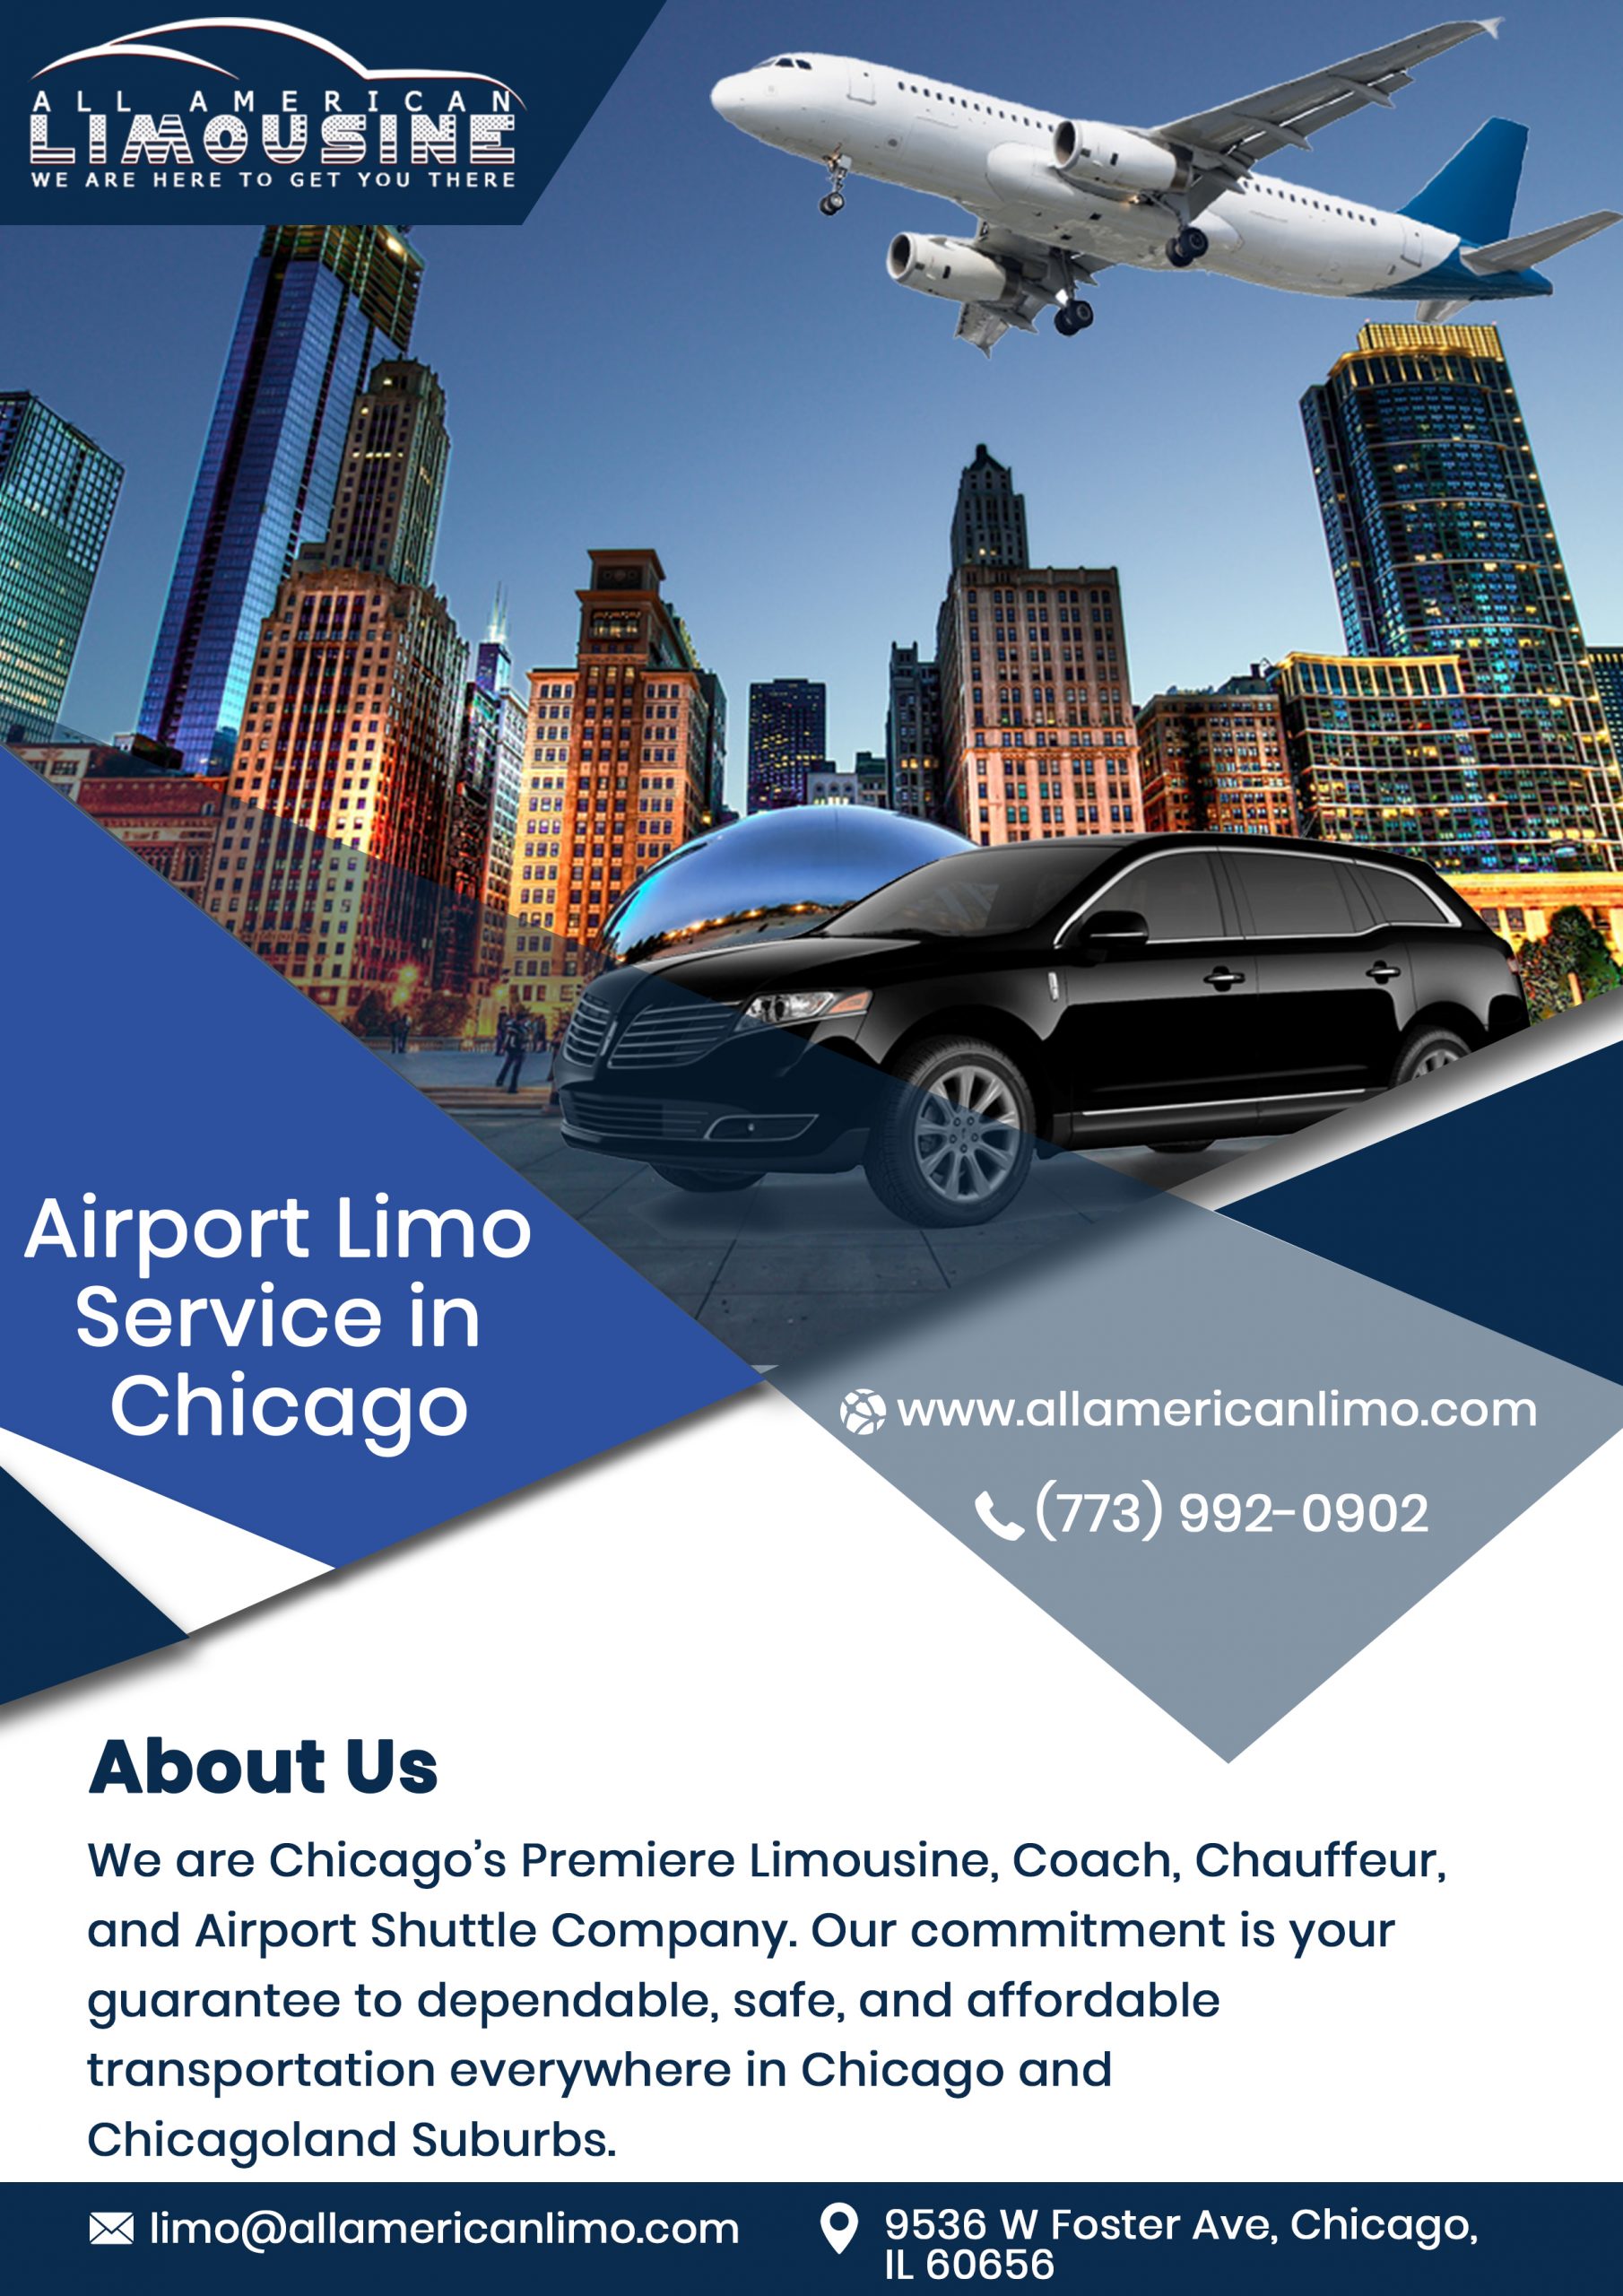 Chicago Car Service Near Me 60625, Party Bus 60625, Mercedes Sprinter Limo to 60625, Chicago Limo 60625, Limo Service 60625 to Airport, Hire, Rent, Get, Find, Car Service 60625 to Airport, Transportation Service 60625 to O'Hare, Corporate Travel 60625, Airport Travel 60625